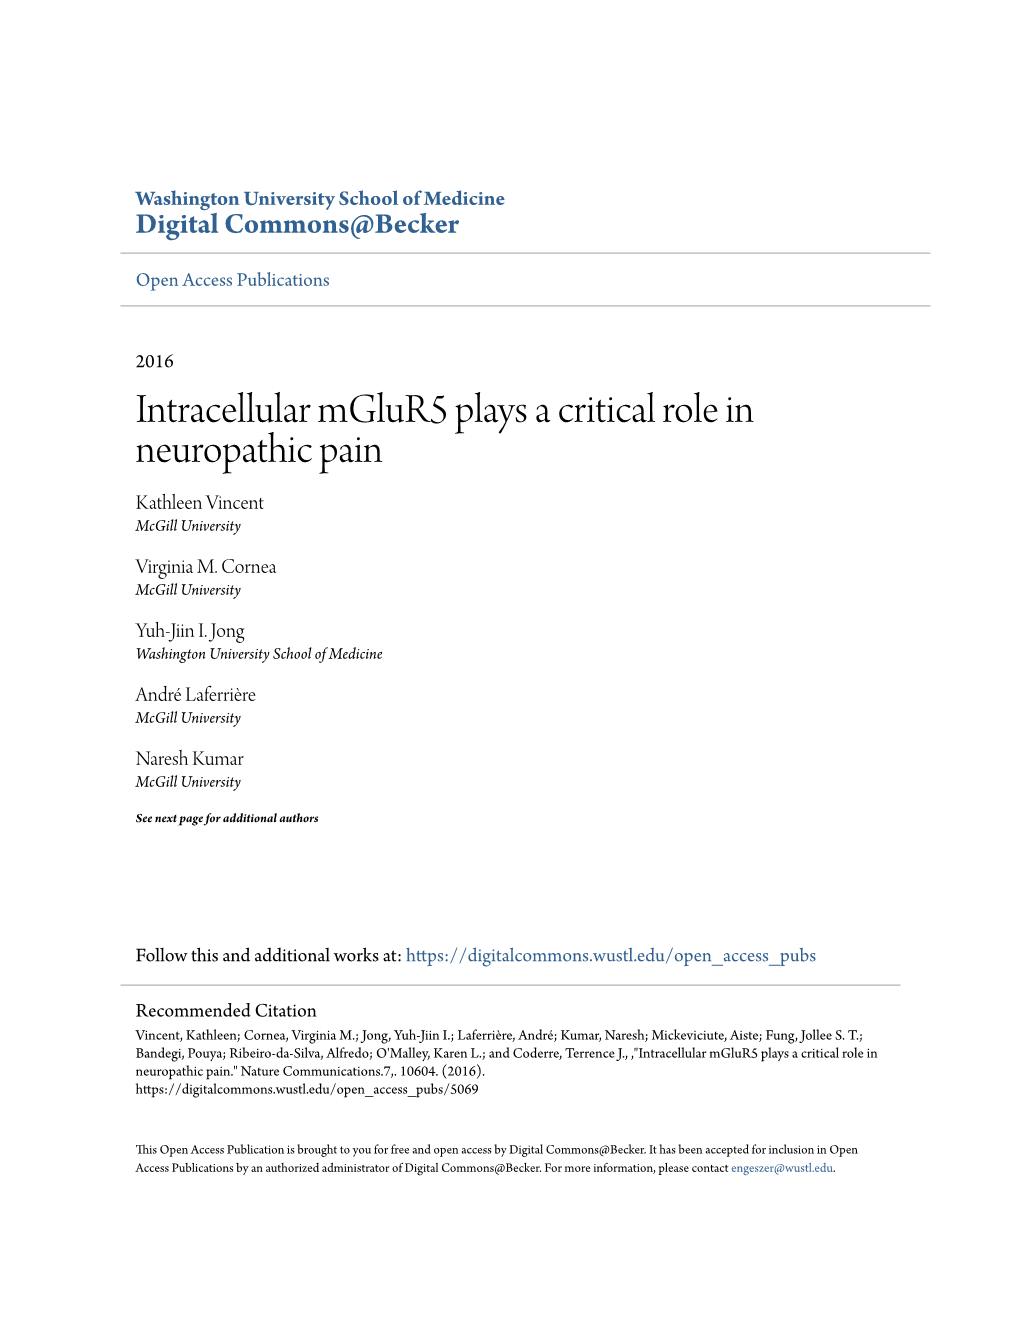 Intracellular Mglur5 Plays a Critical Role in Neuropathic Pain Kathleen Vincent Mcgill University